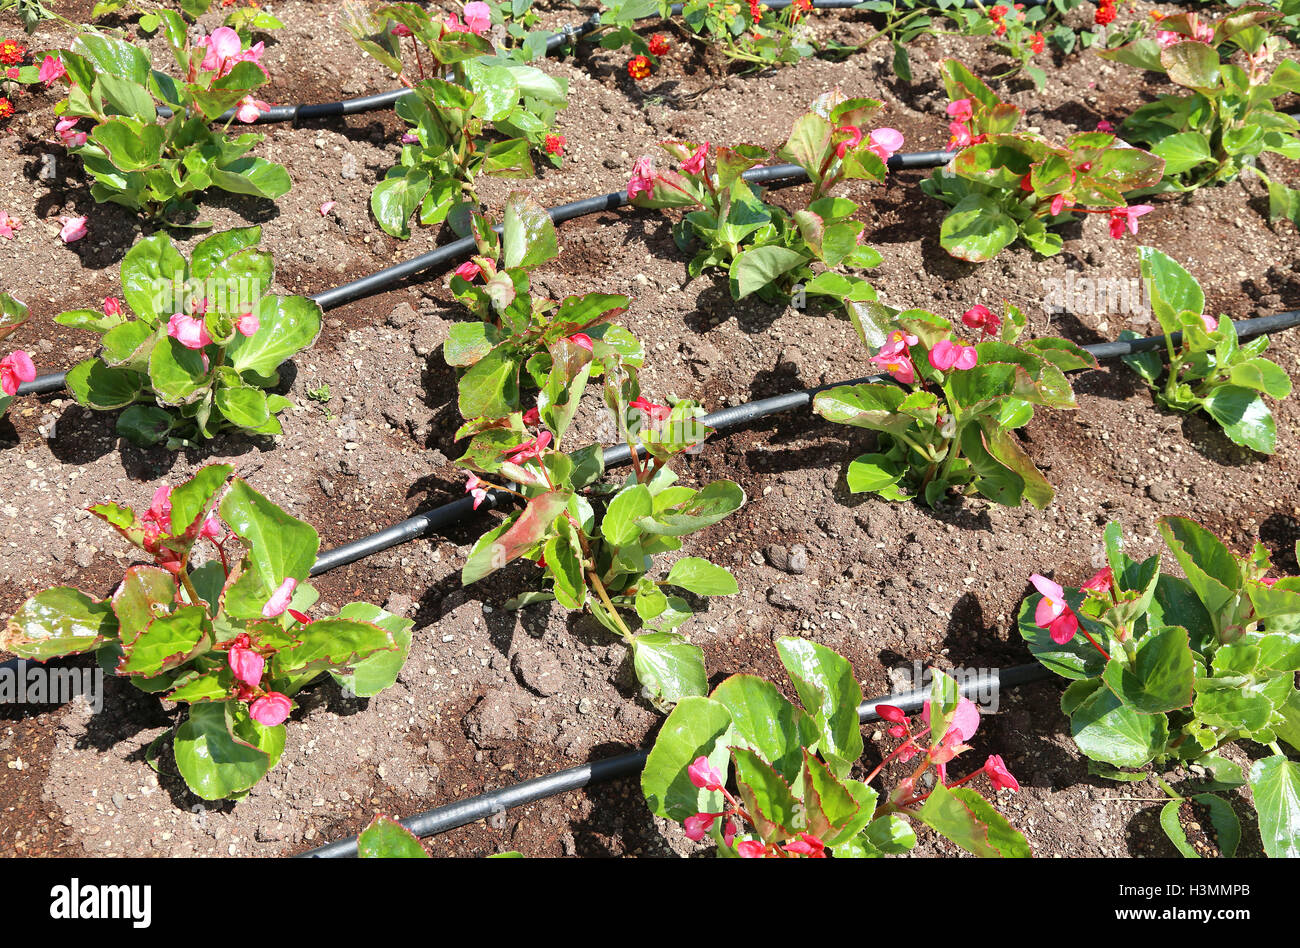 flowerbed with automatic watering system and some pink flowers Stock Photo